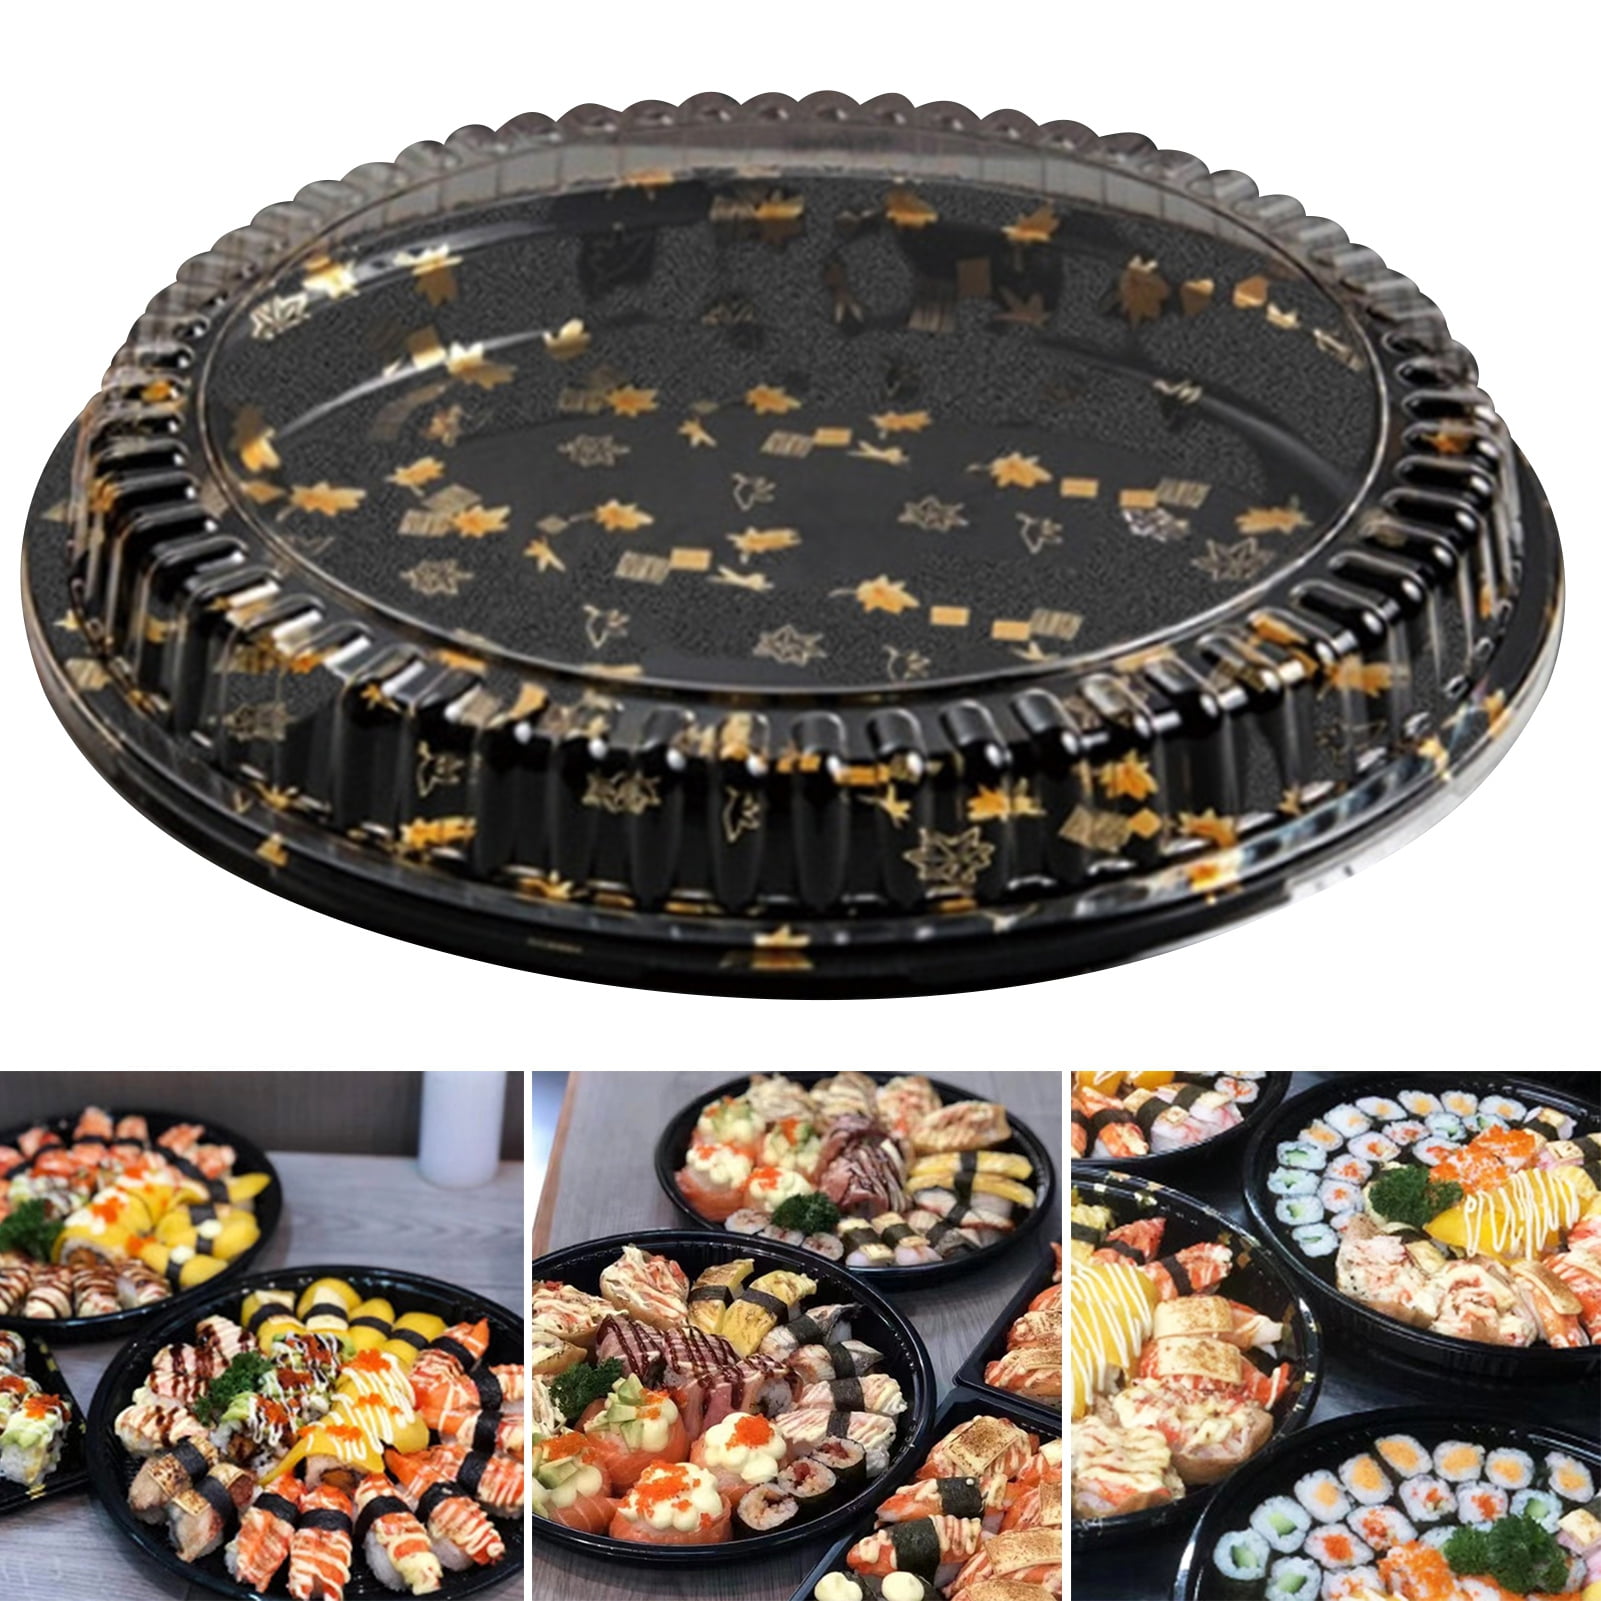 premium food tray - Surpriseworld Delicious food tray for birthdays, parties